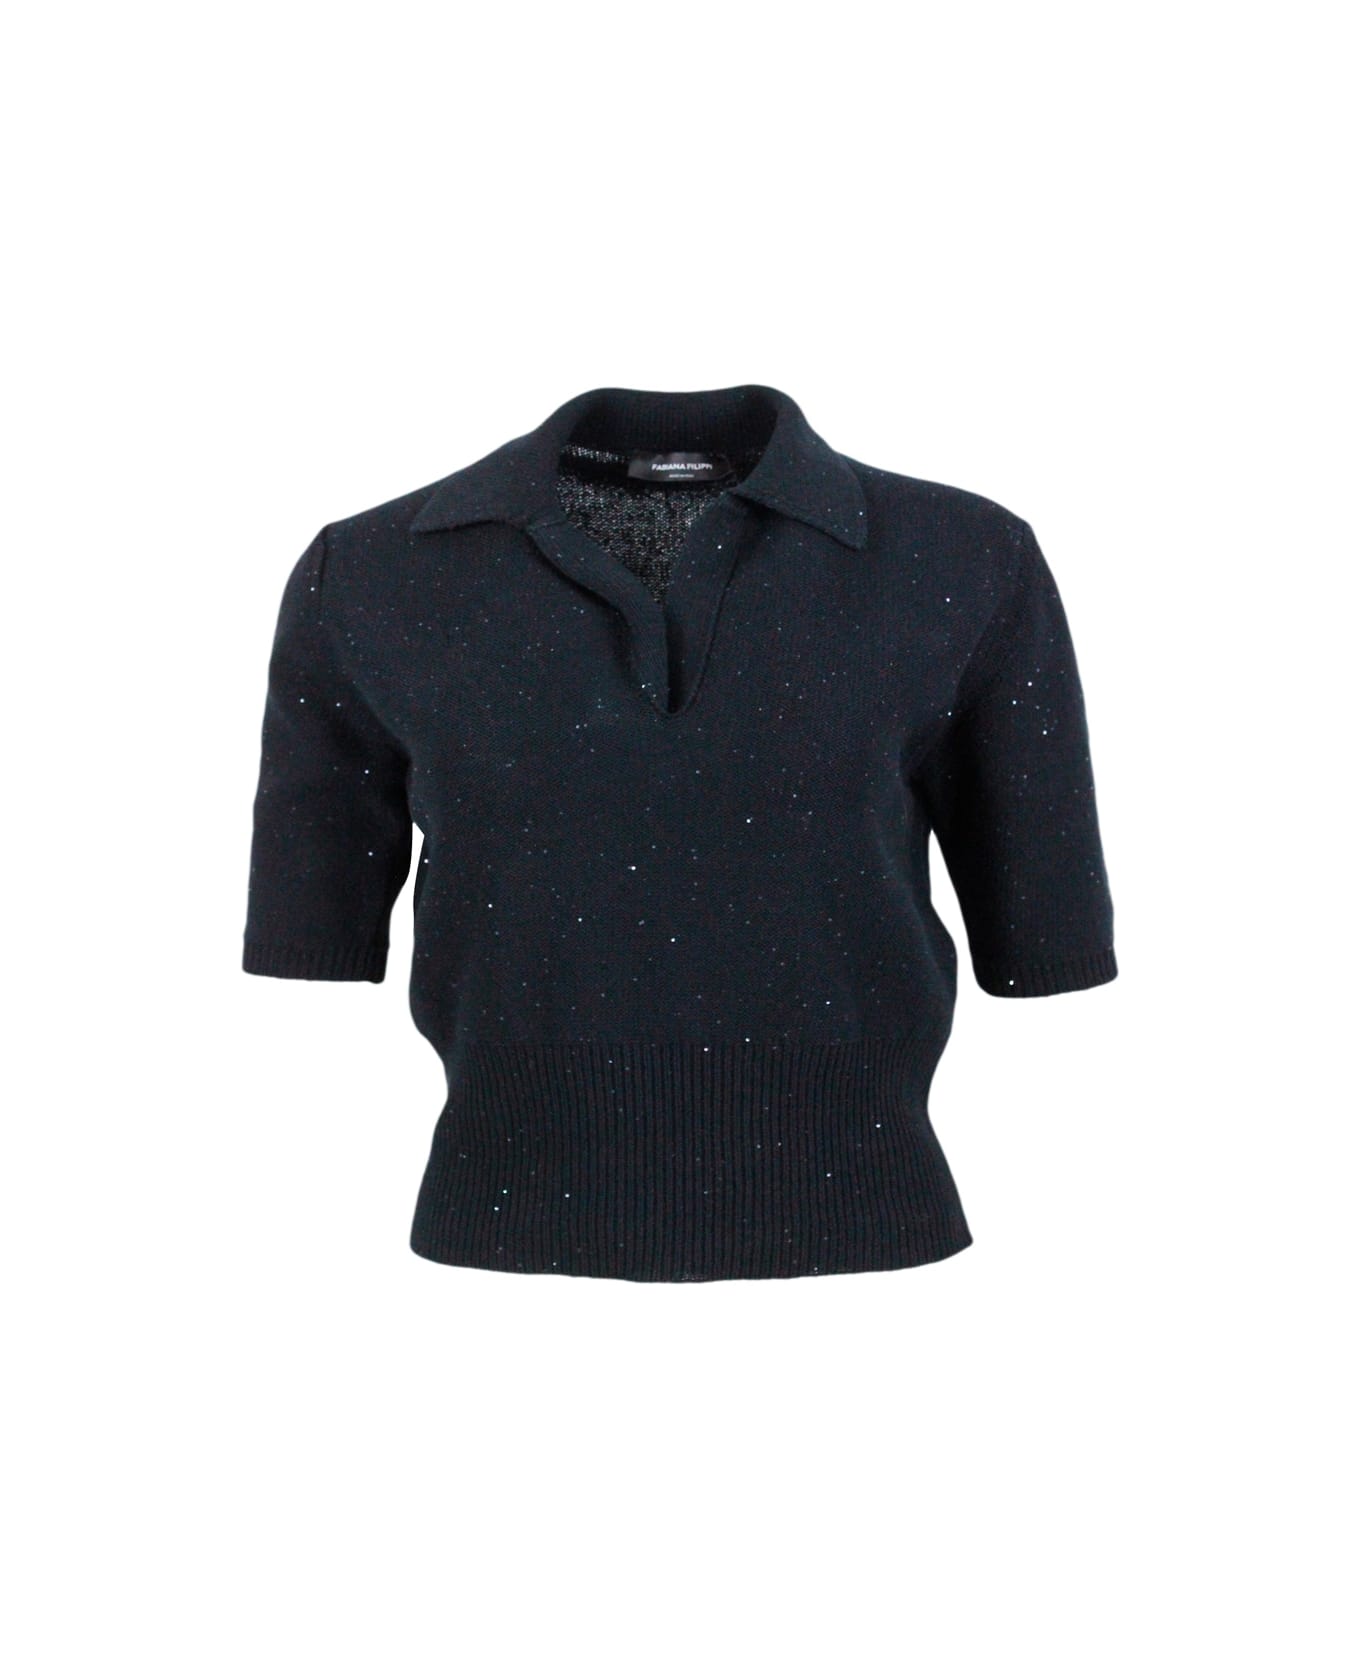 Fabiana Filippi Short-sleeved Polo Shirt In Cotton And Linen, Embellished With Brilliant Applied Micro-sequins - Black